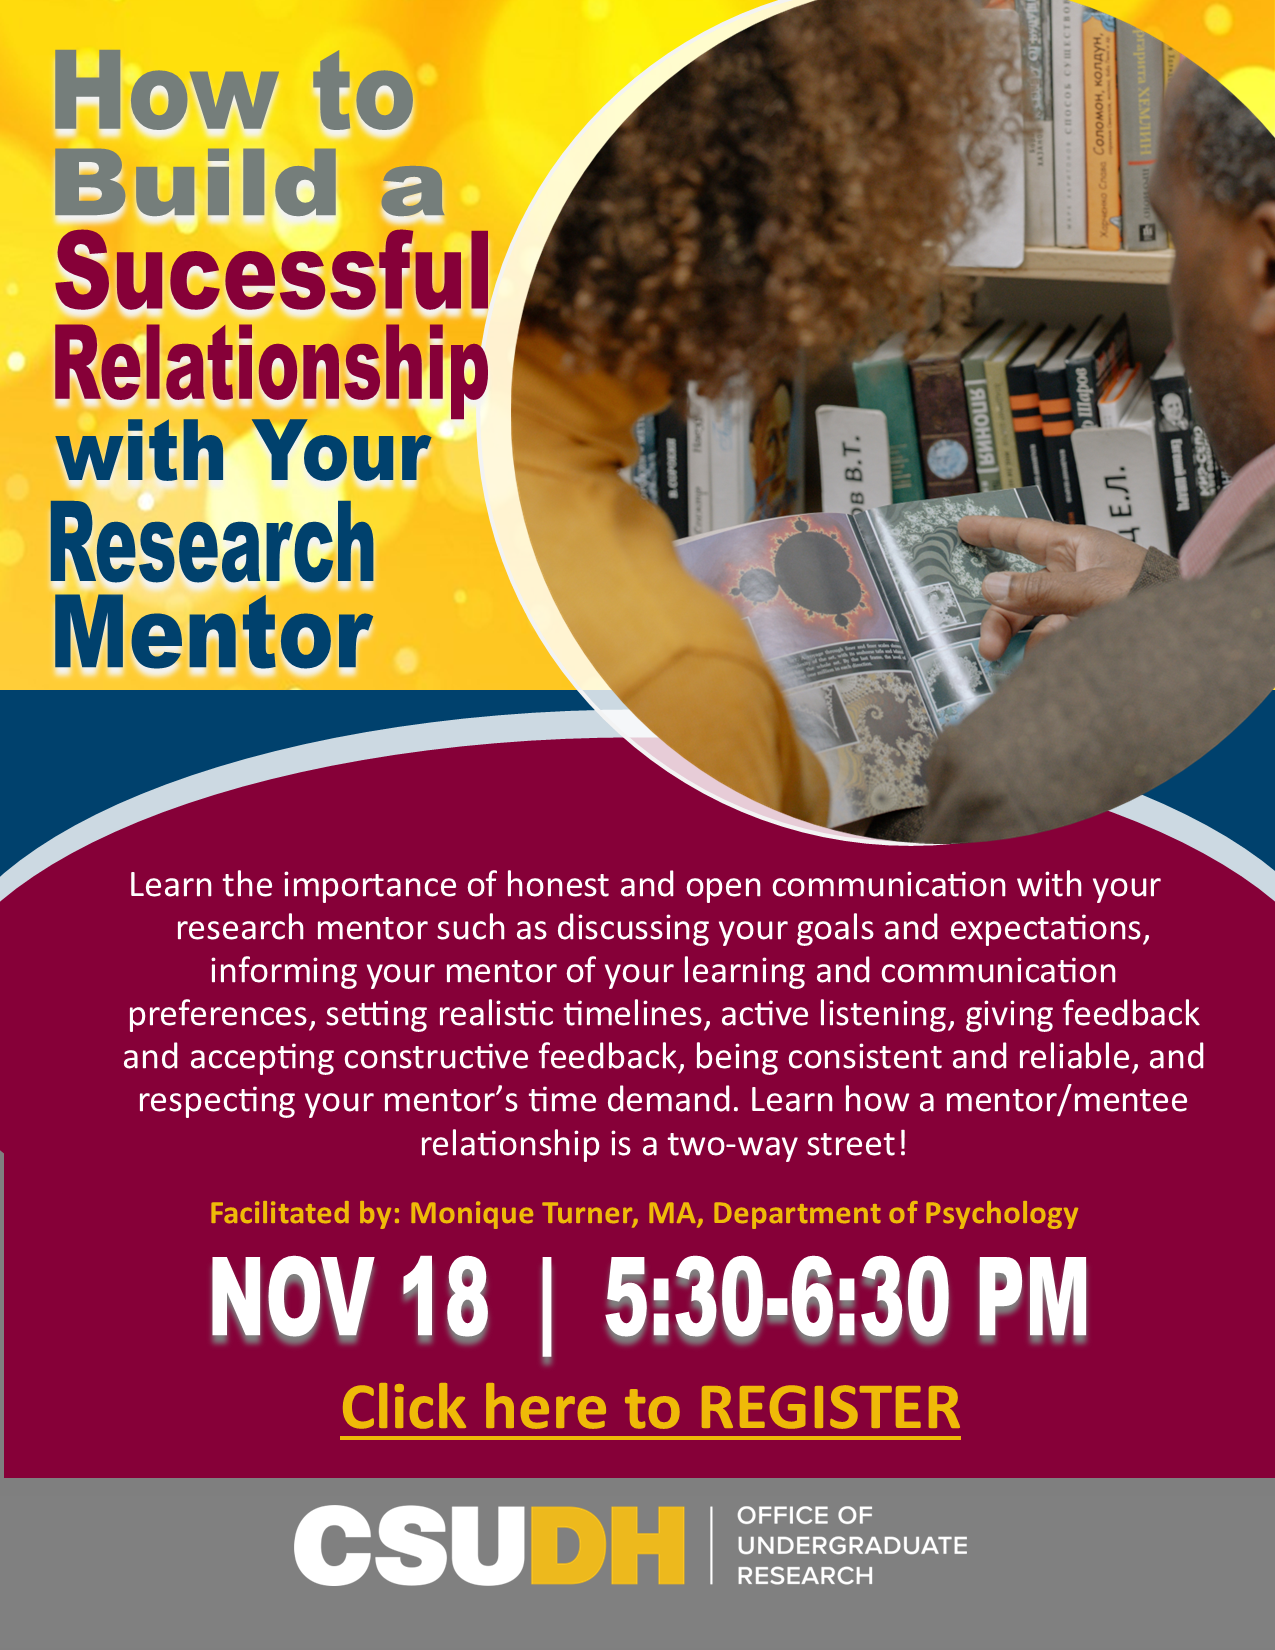 How to Build a Successful Relationship with Your Research Mentor 11-18-21